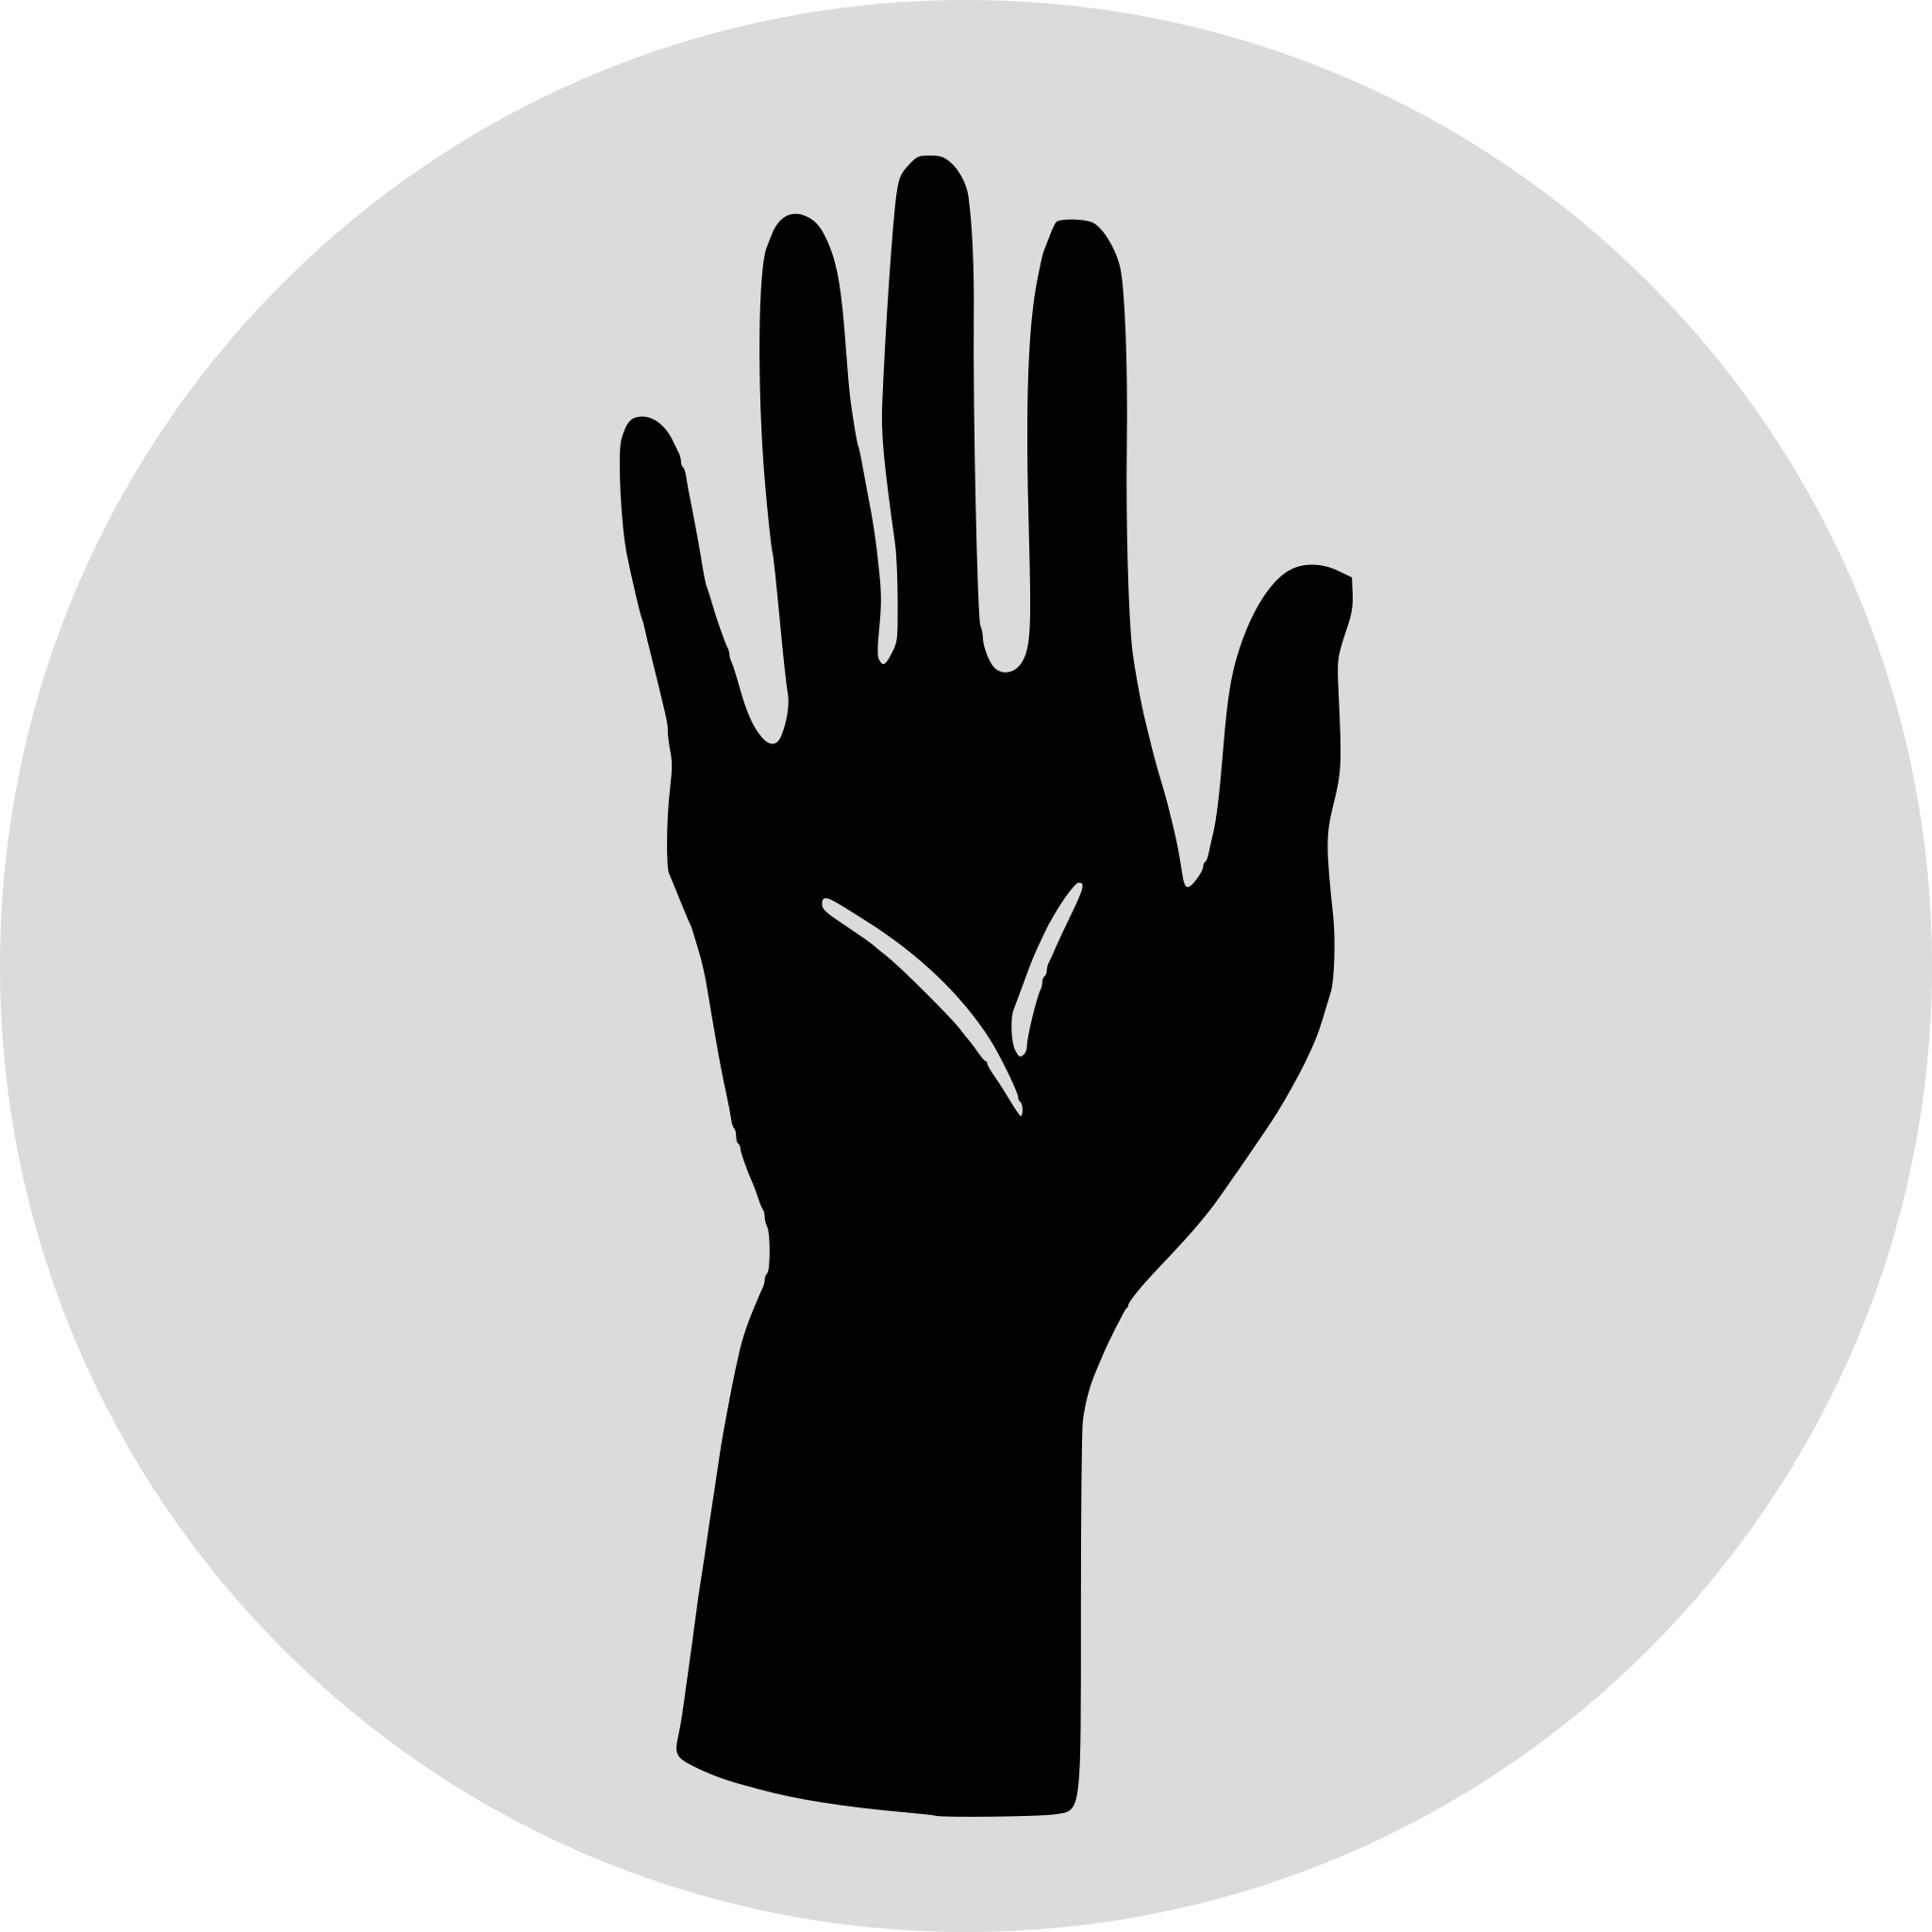 File:Raise hand gesture occupy.svg - Wikimedia Commons